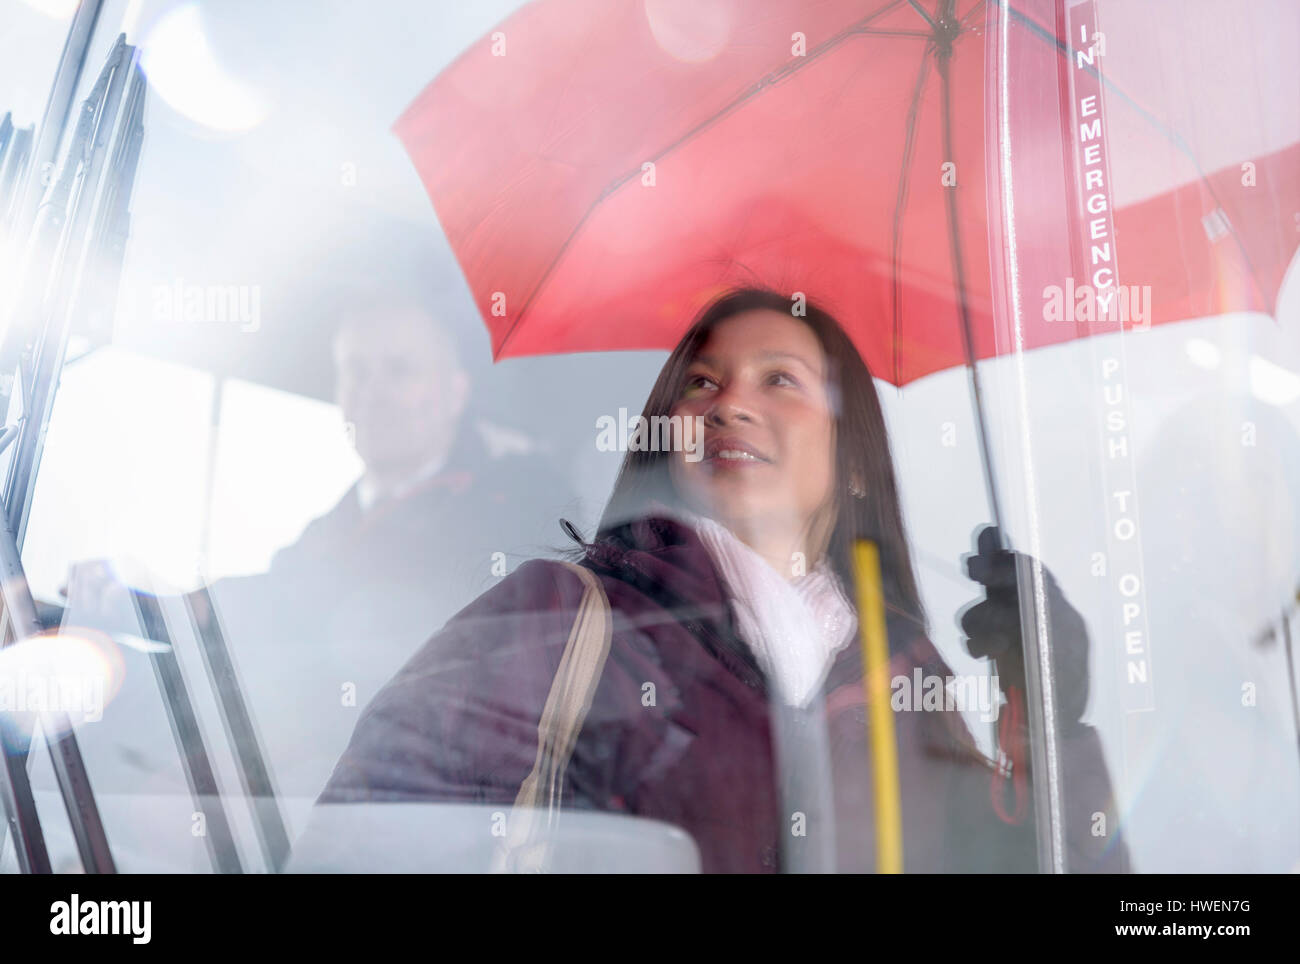 Passenger with umbrella reflected in windscreen of electric bus Stock Photo